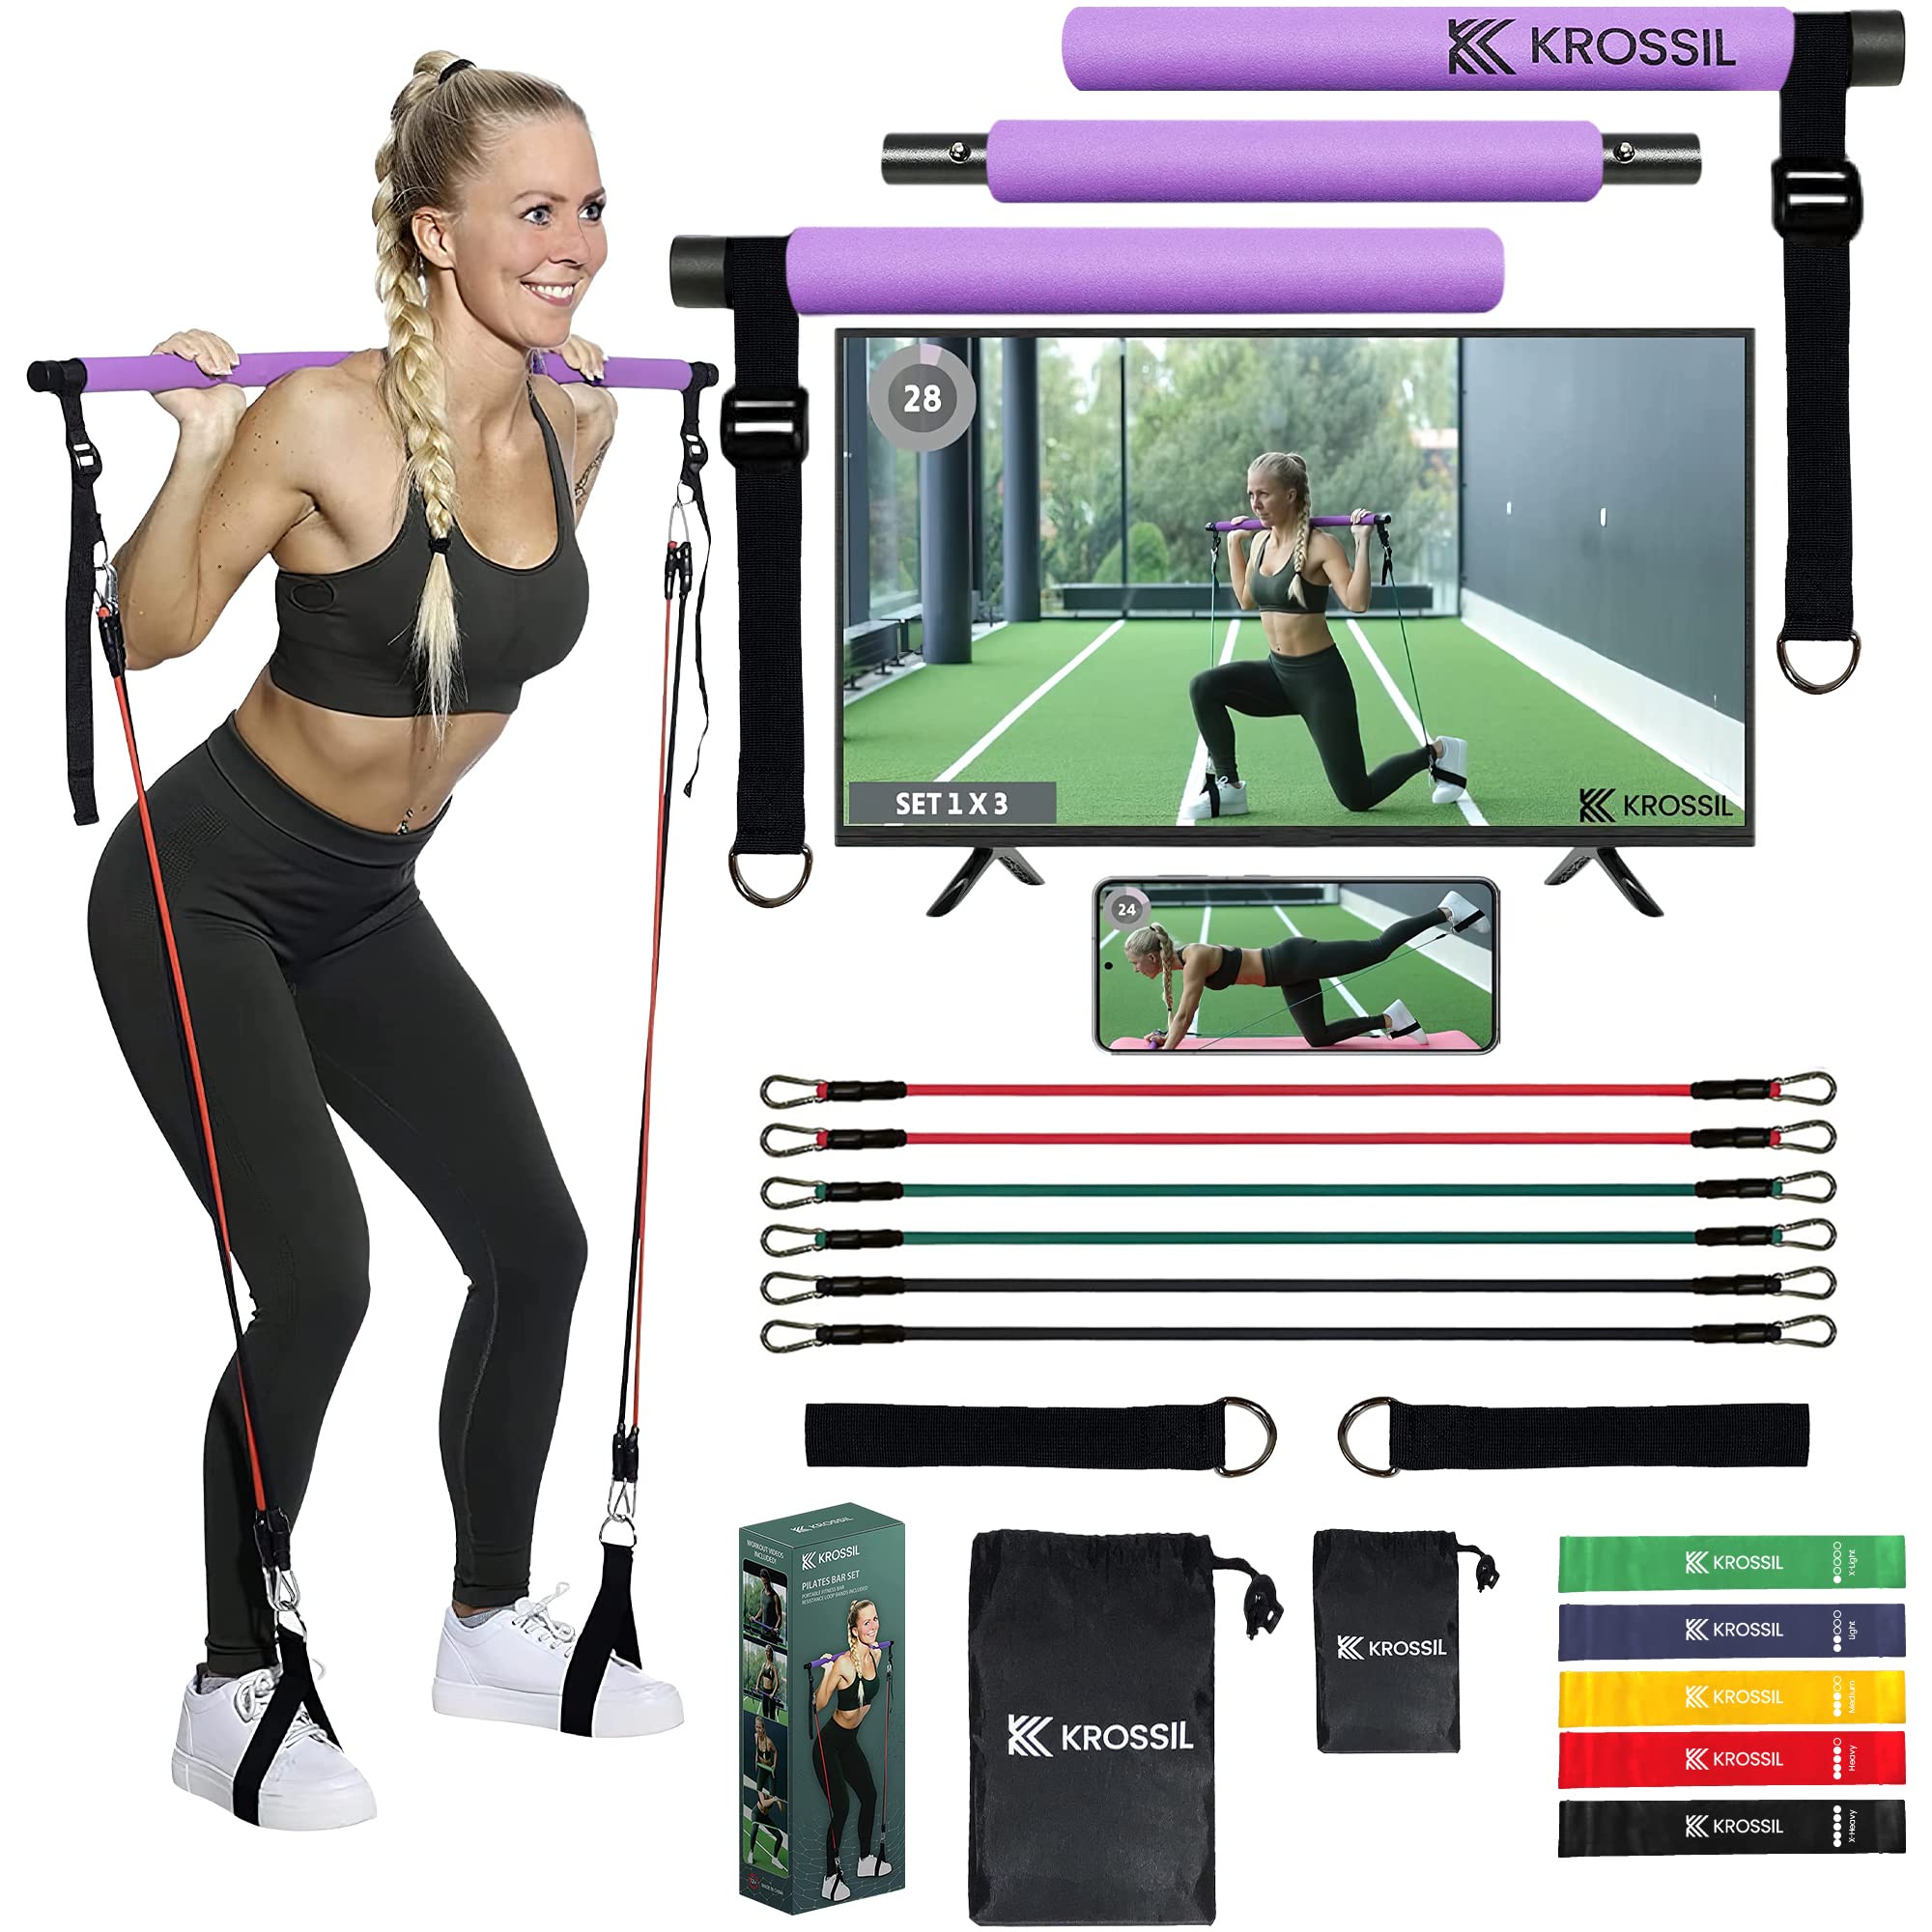 Pilates Bar Kit with Resistance Bands - Workout Equipment for Home